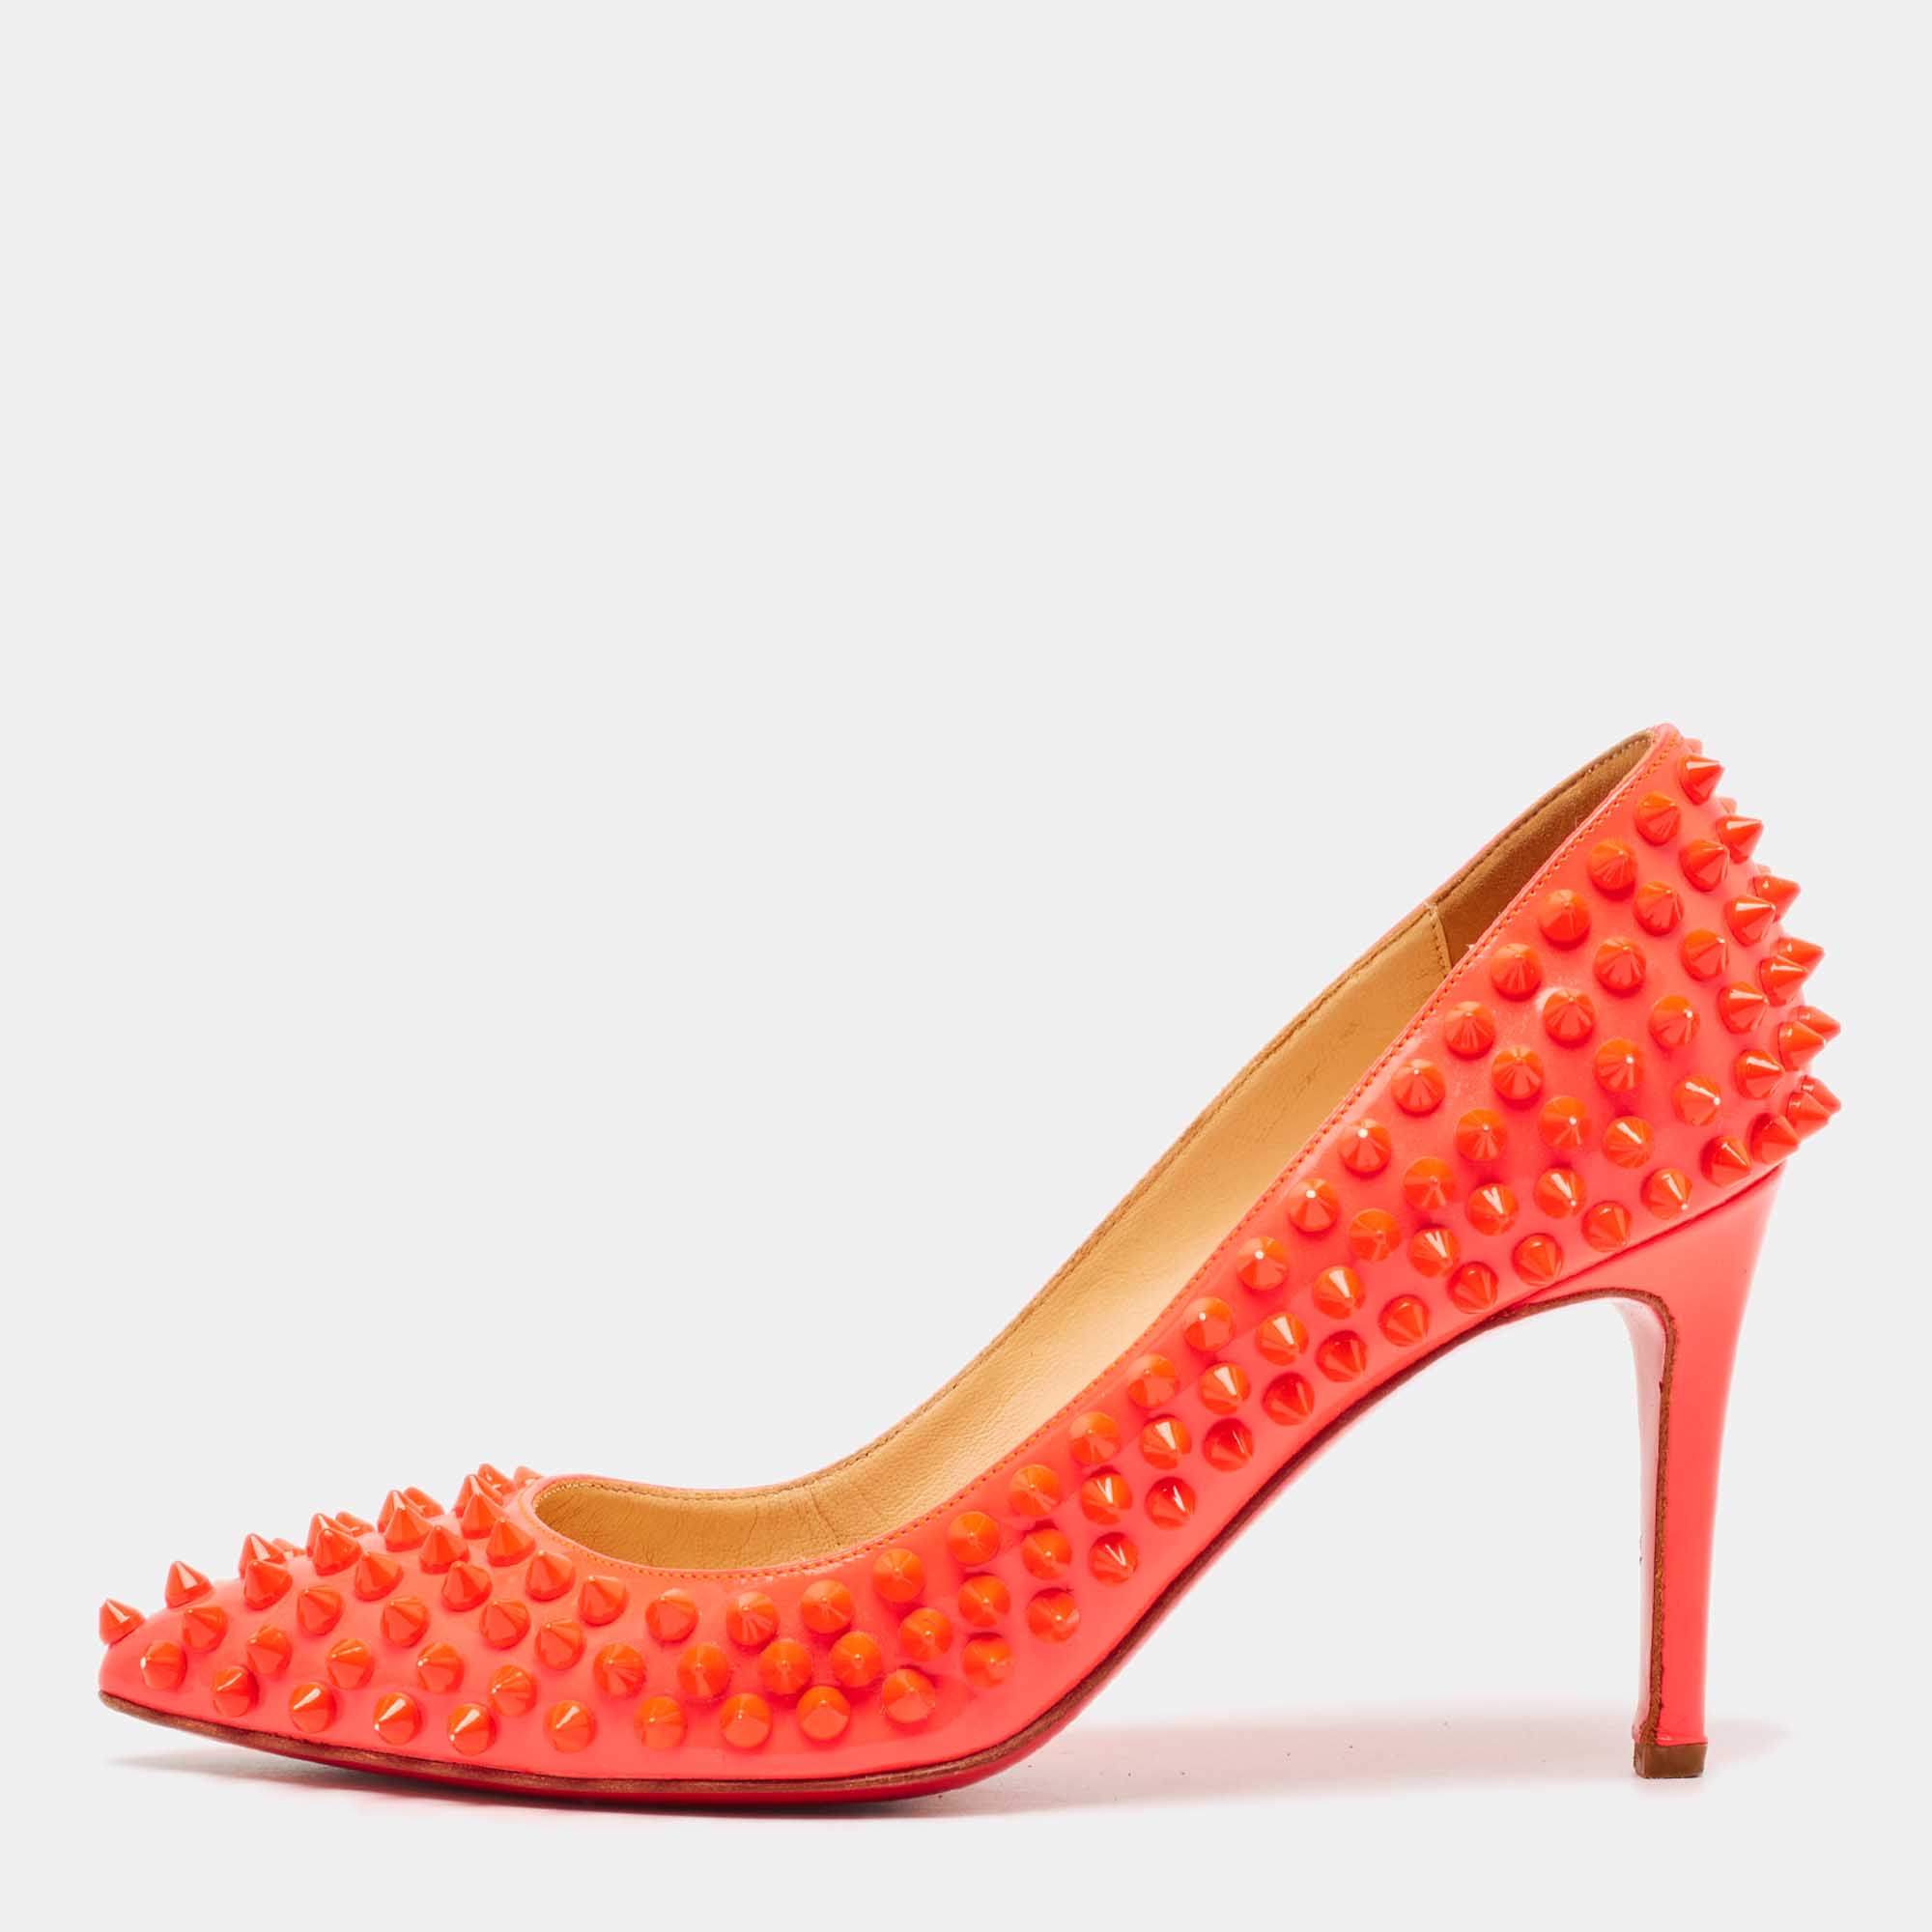 Christian louboutin neon pink patent leather pigalle spikes pumps size 35.5